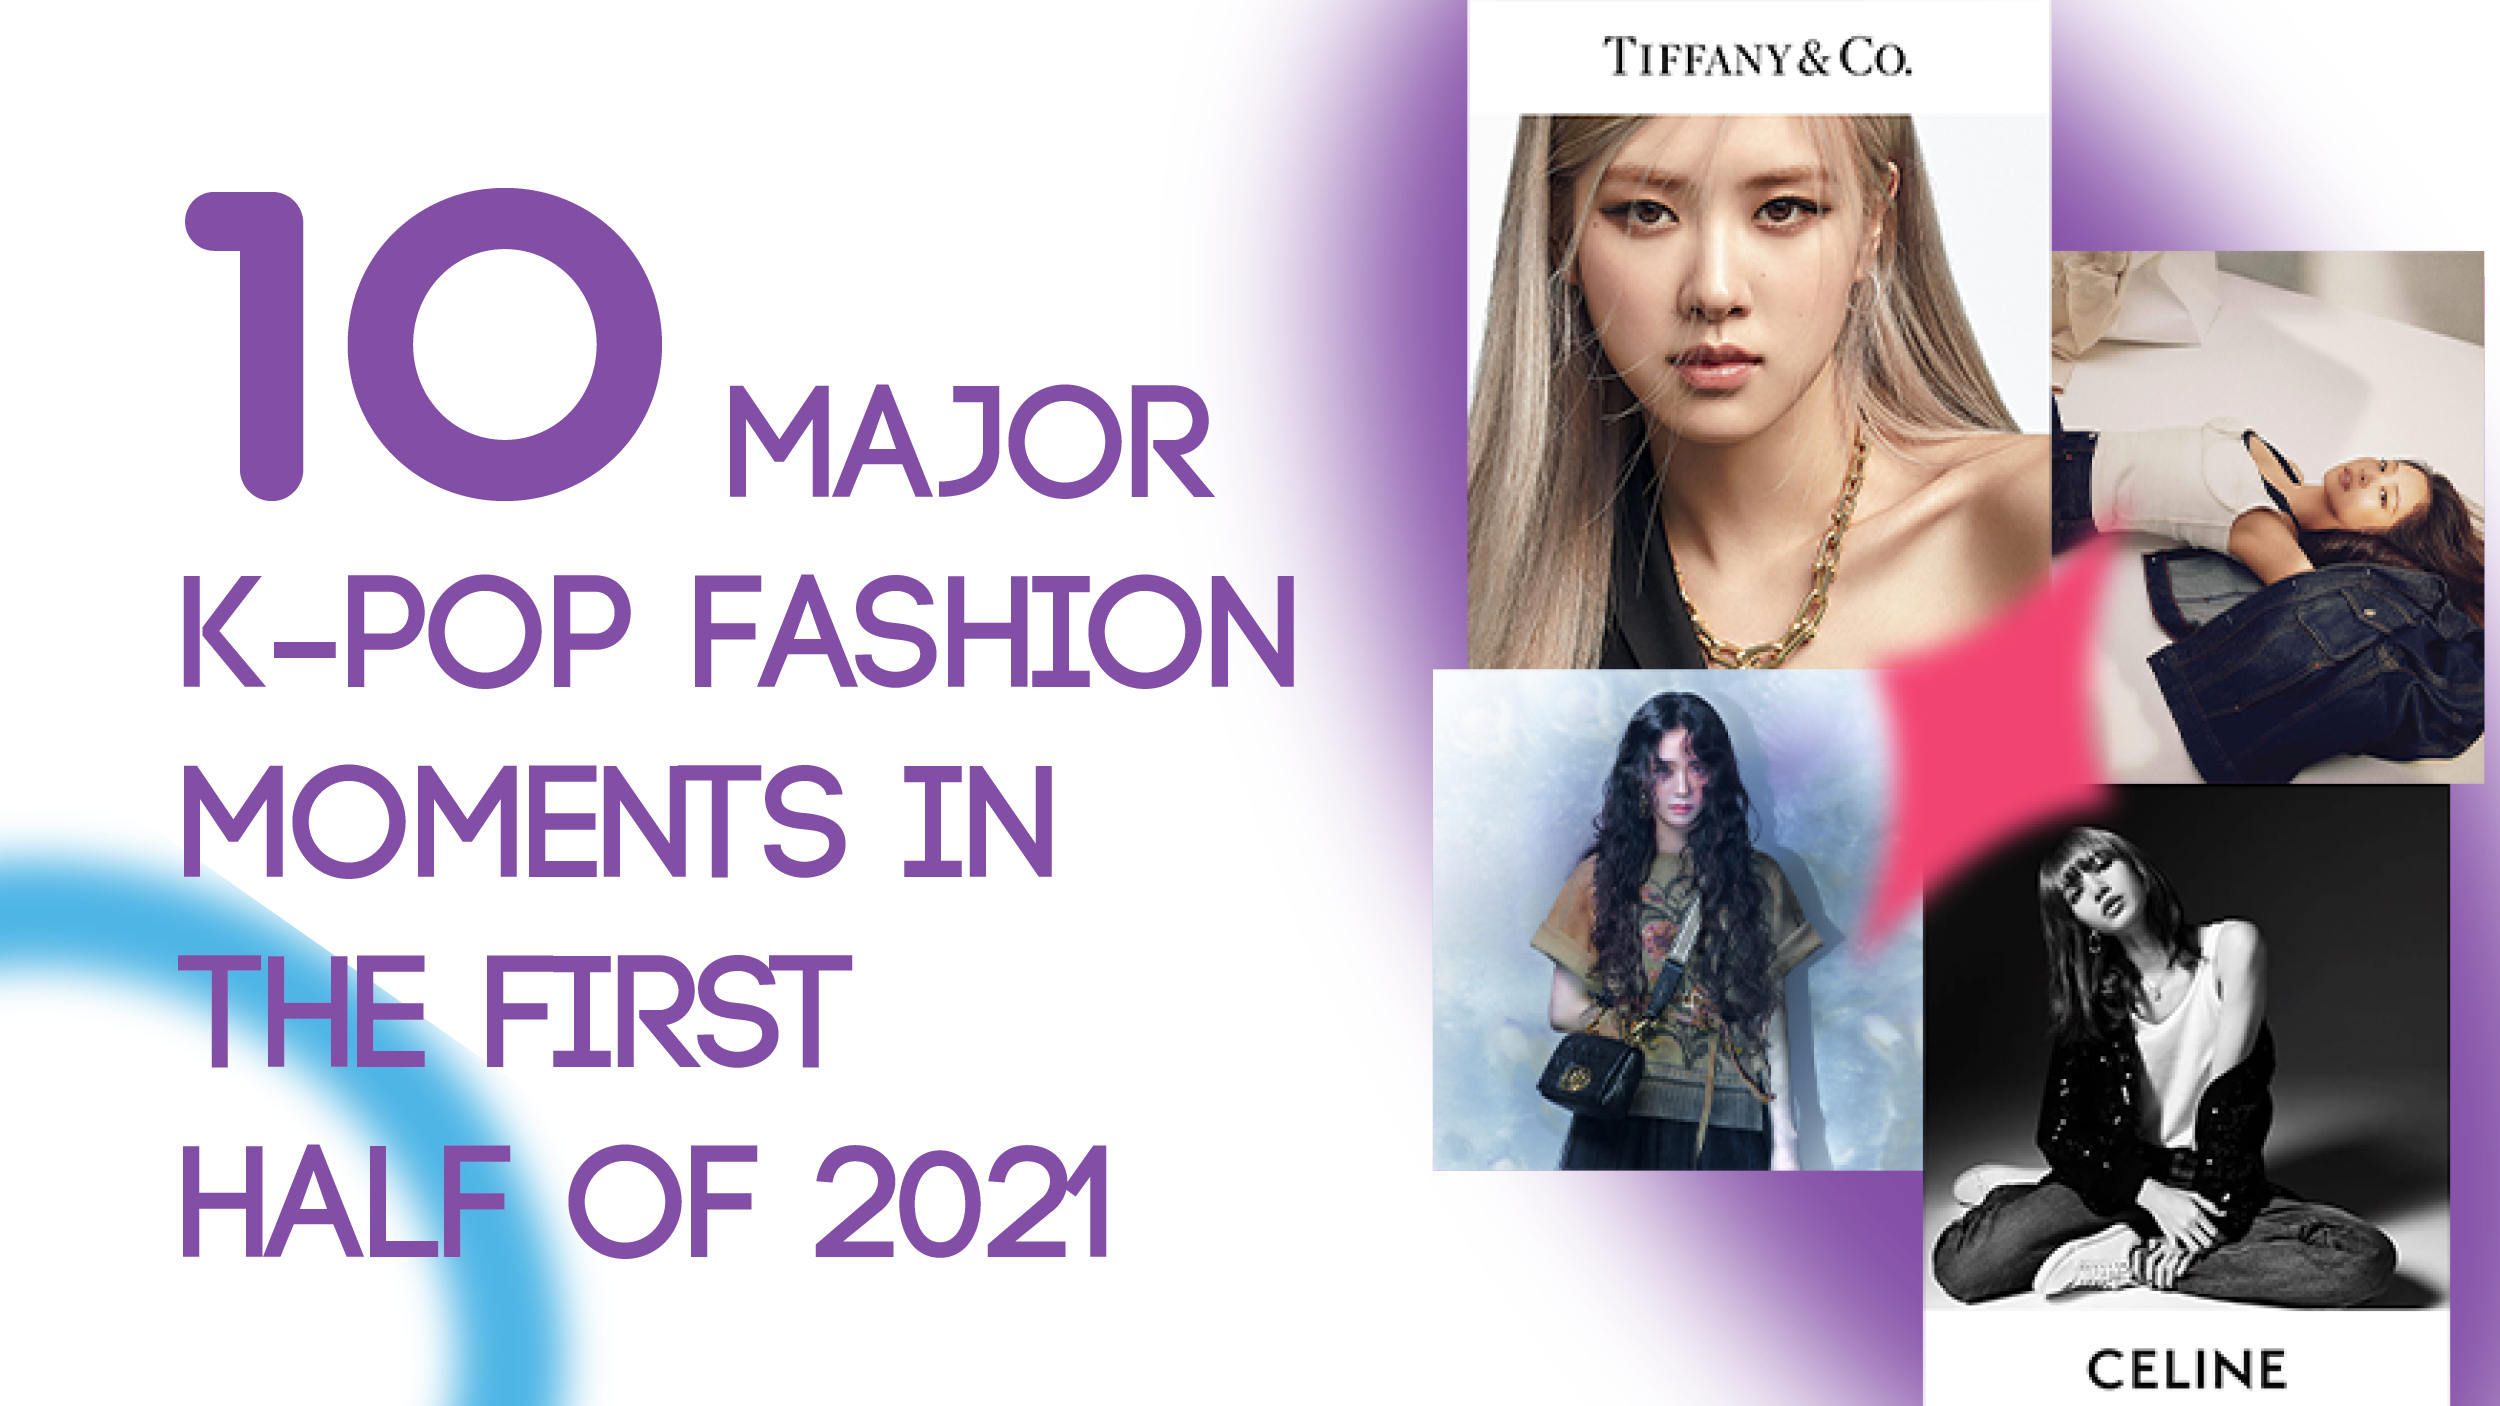 10 Major K-pop Fashion Moments in the First Half of 2021 - EnVi Media